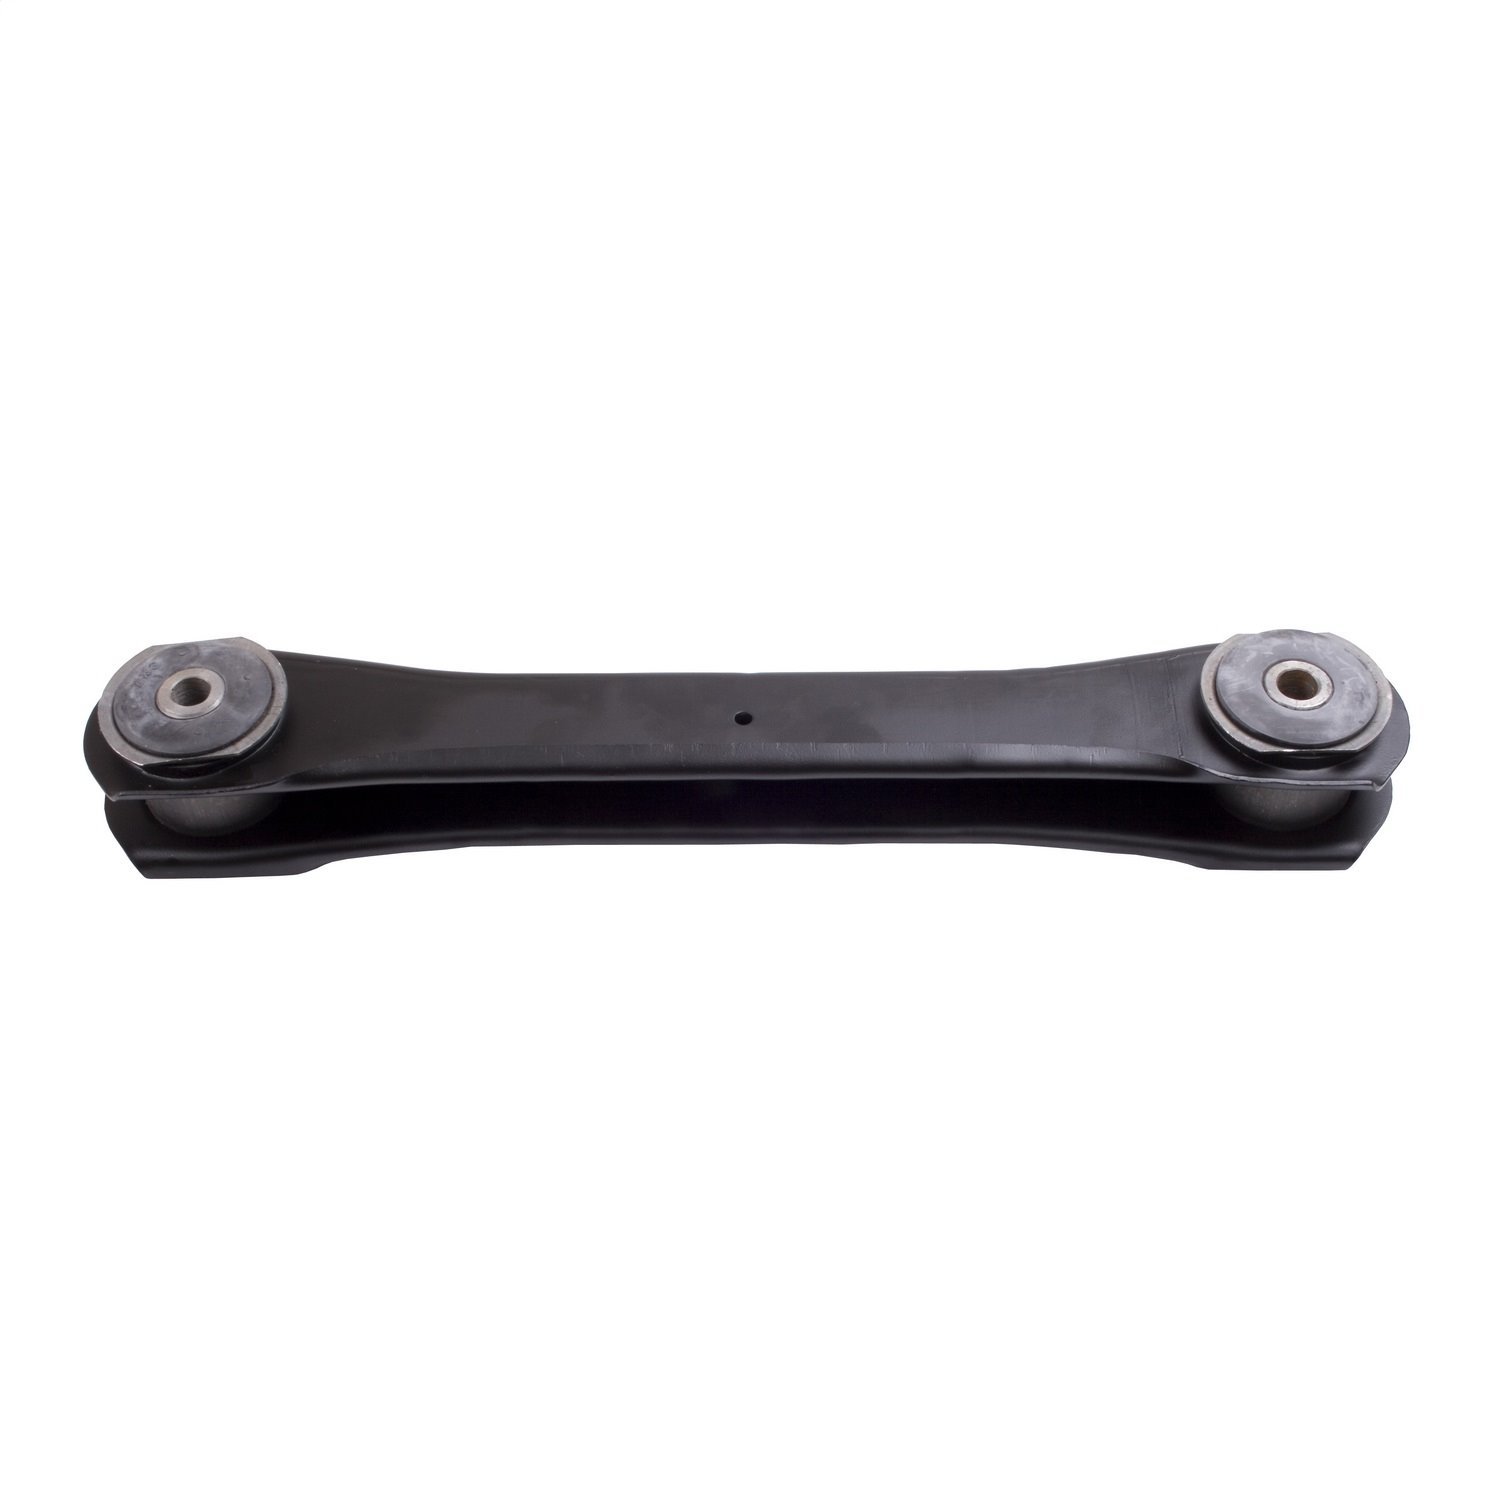 Replacement front lower control arm from Omix-ADA, Fits 84-01 Jeep Cherokee XJ 93-98 Jeep Grand